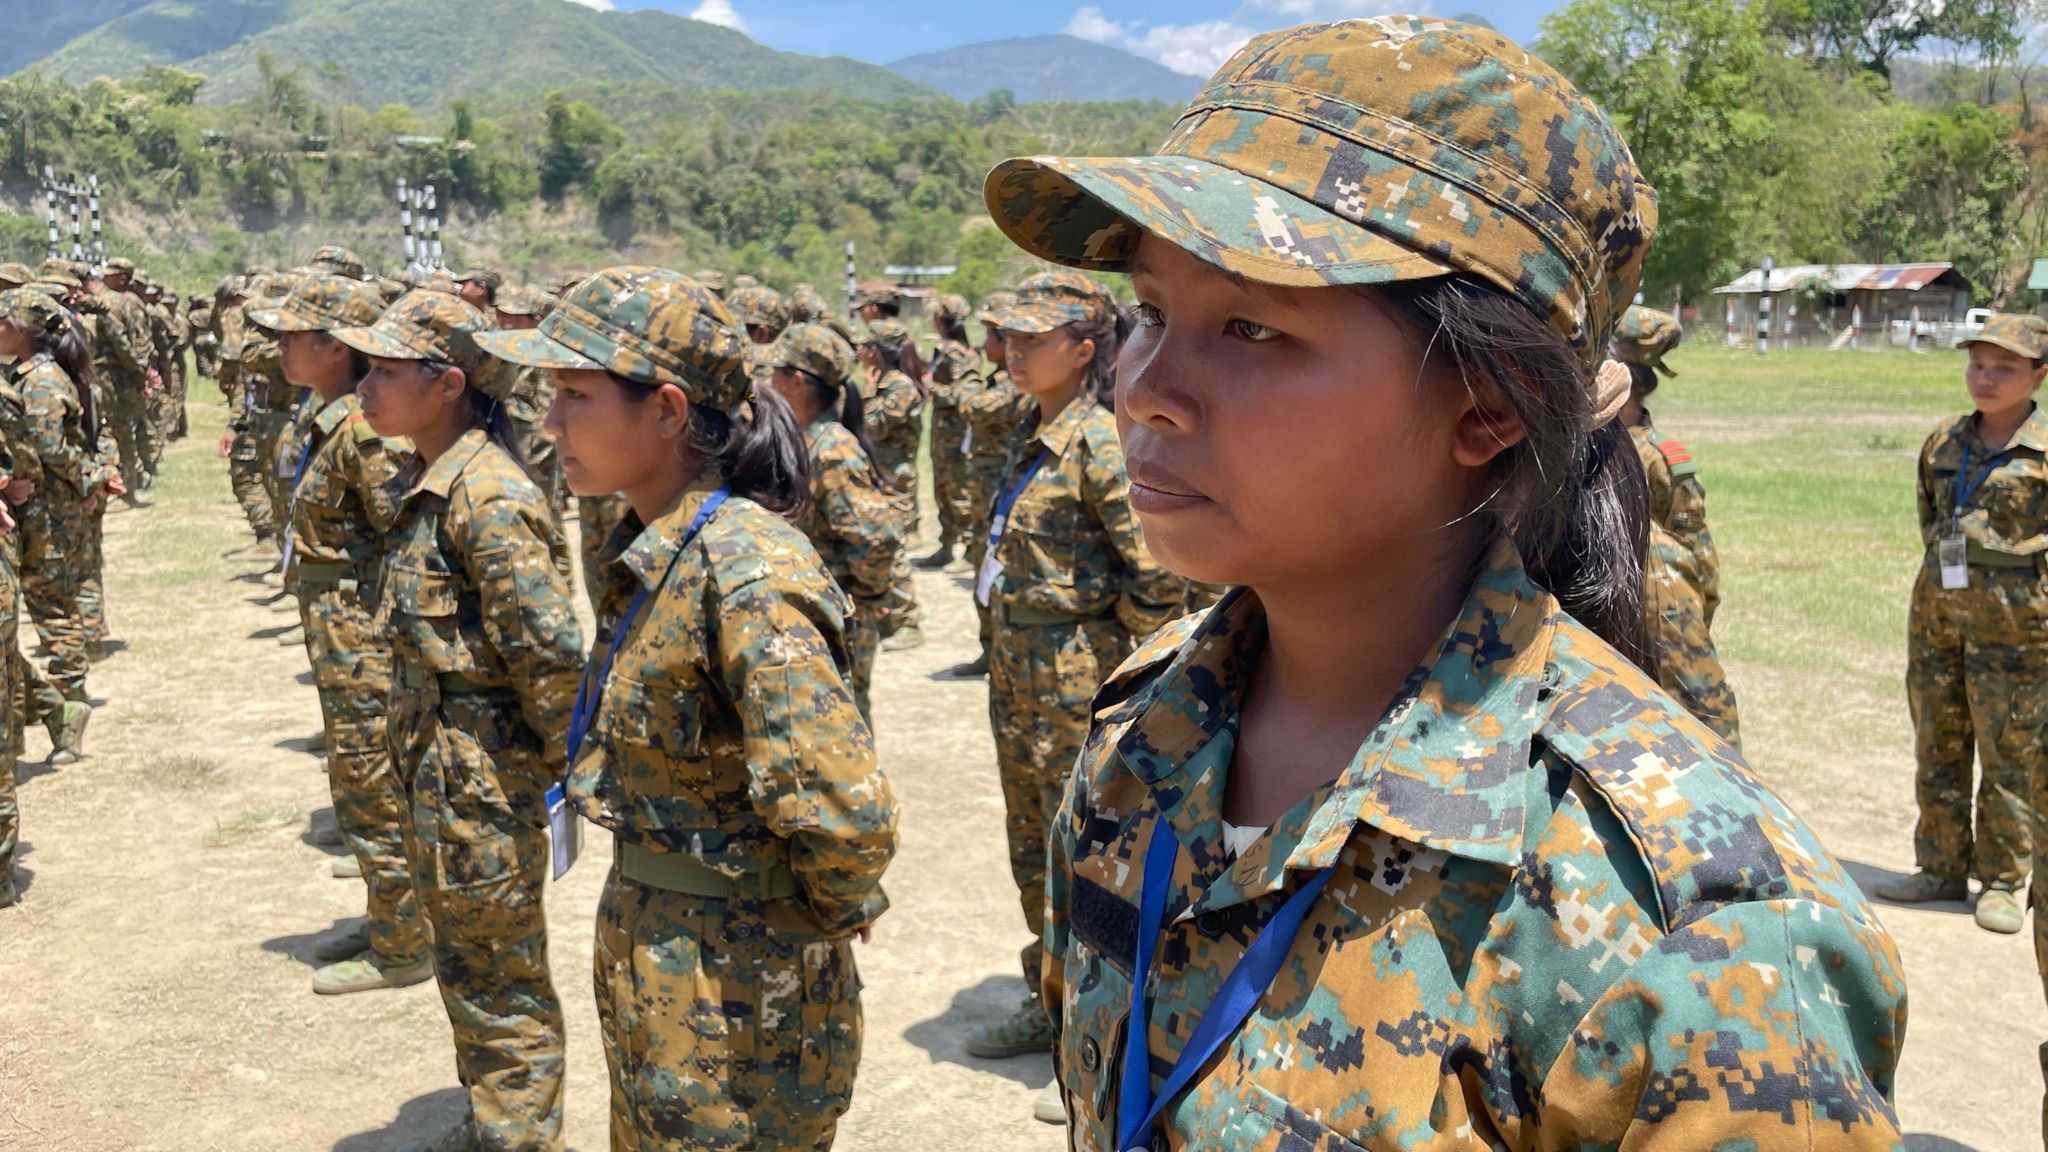 Female recruits are seen at a People Defence Force training ground in combat fatigues